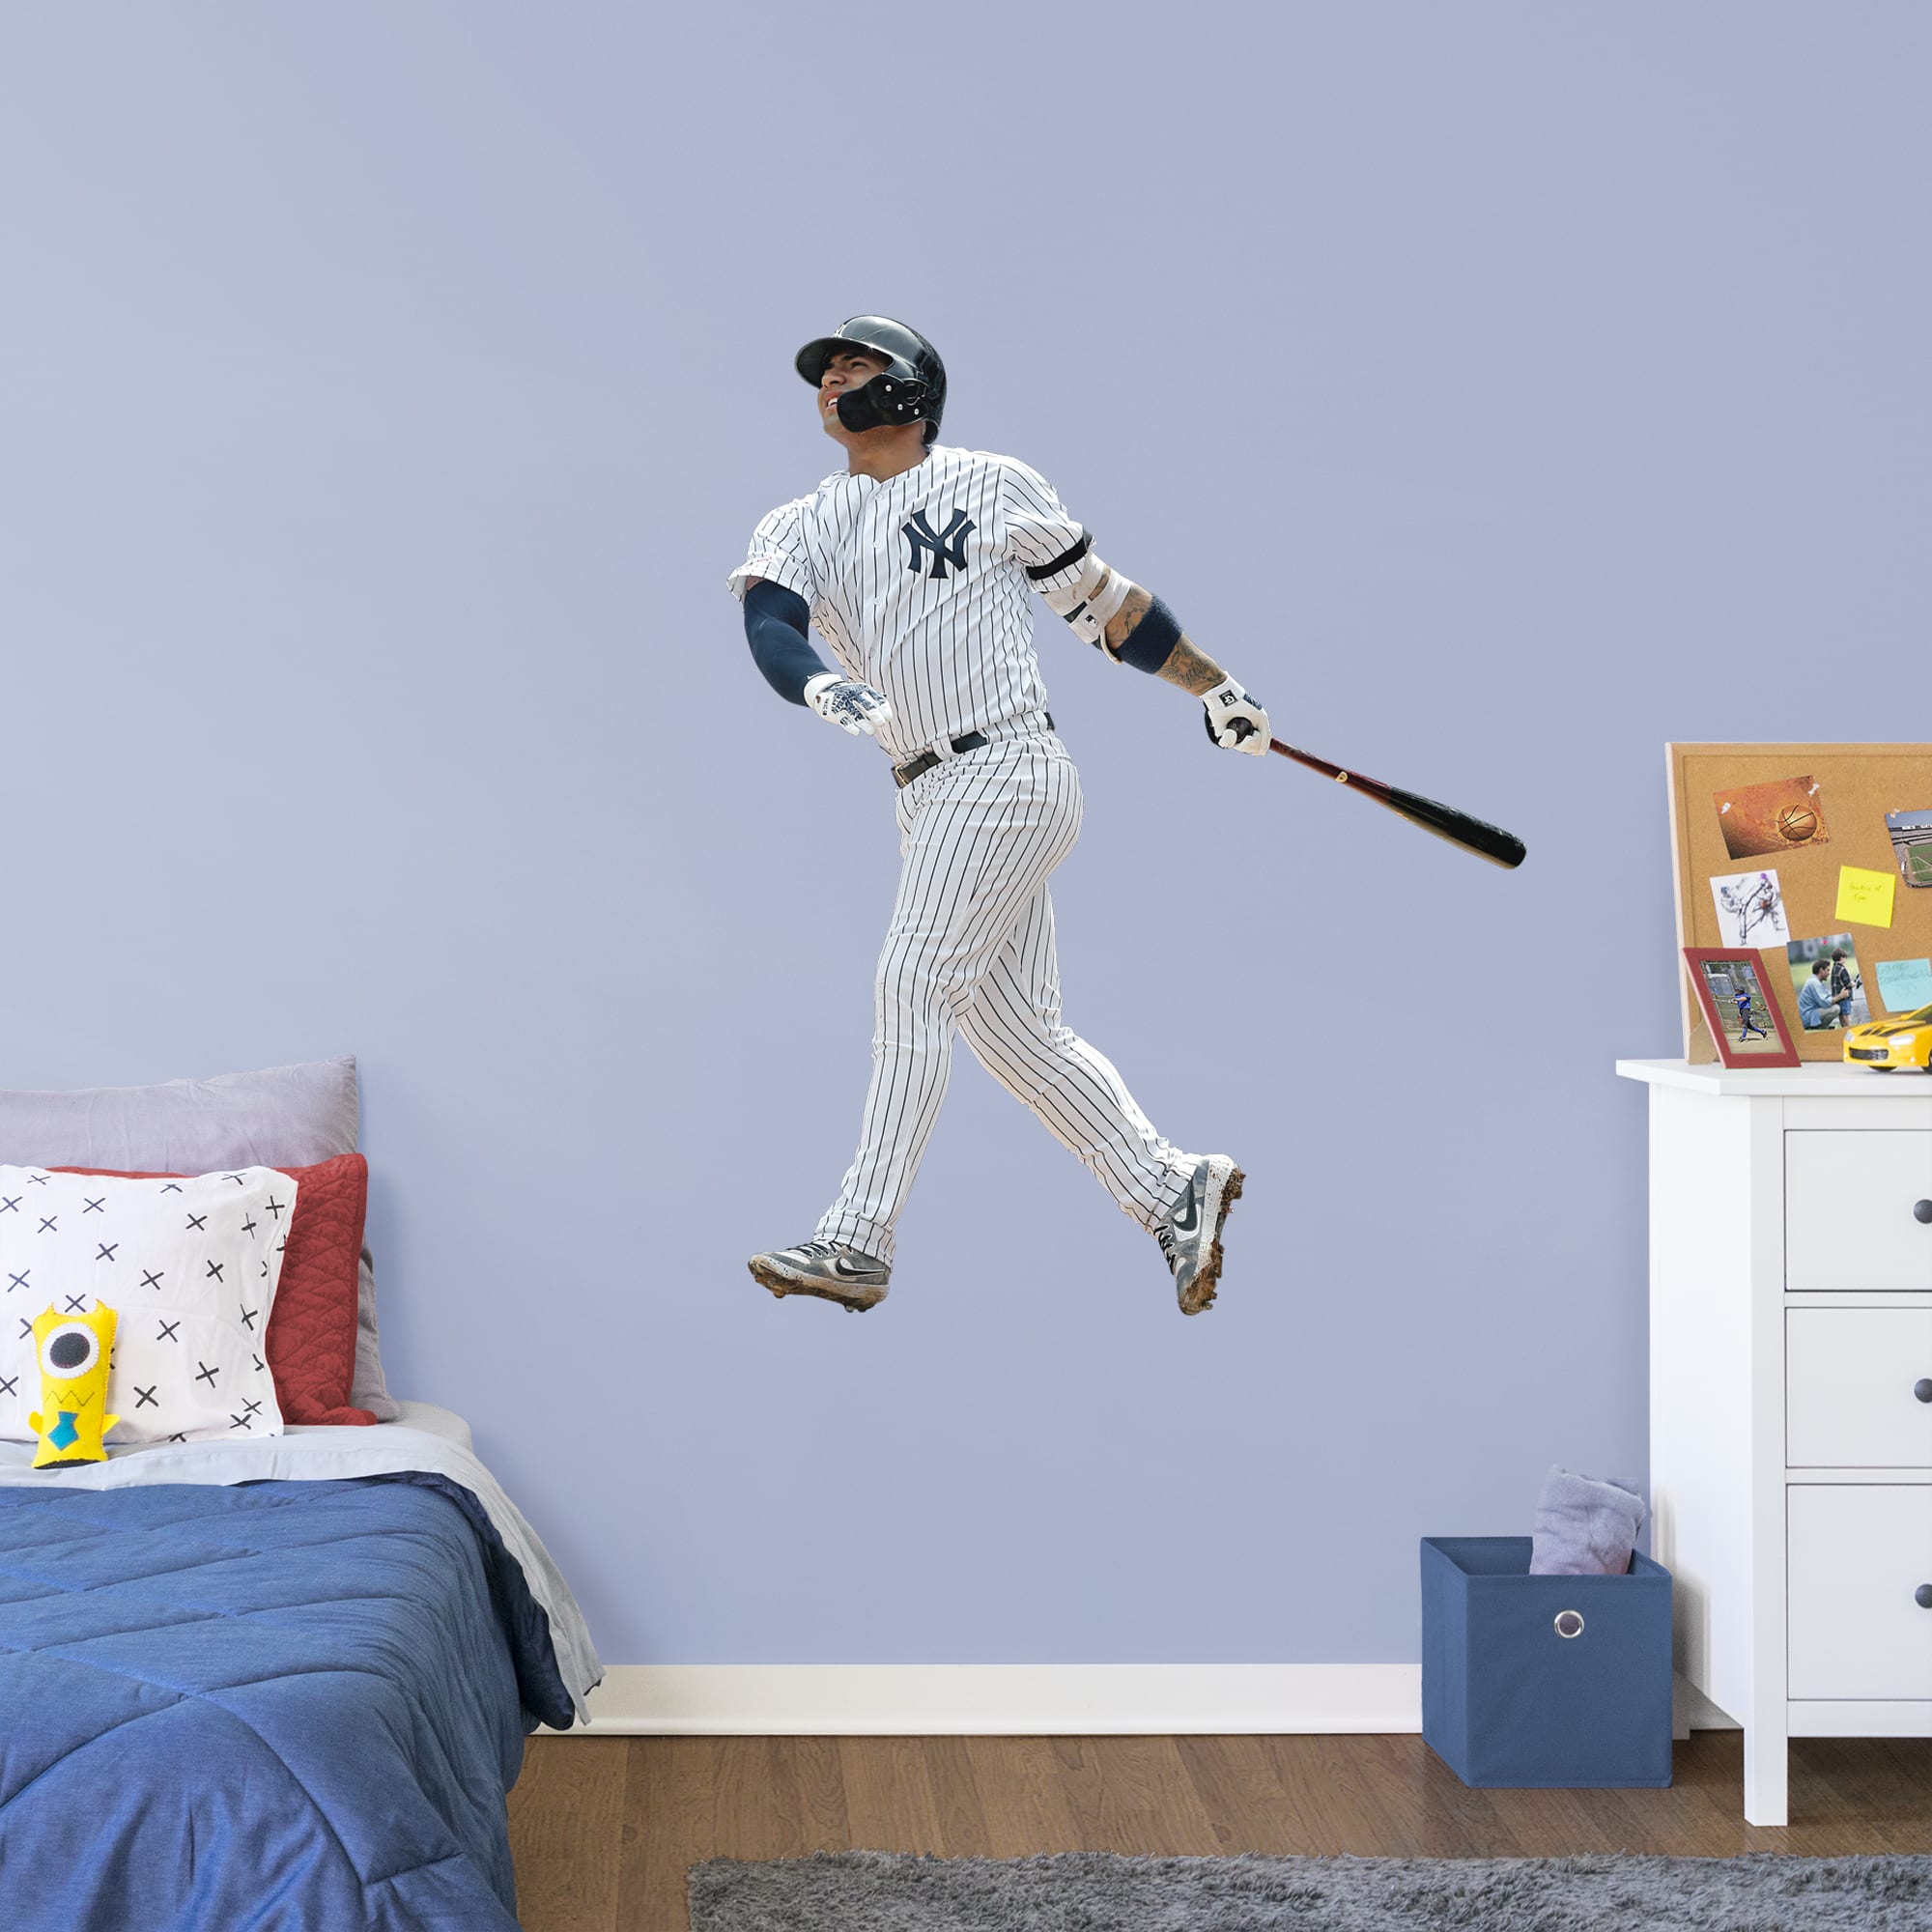 Gleyber Torres for New York Yankees - Officially Licensed MLB Removable Wall Decal Giant Athlete + 2 Decals (41"W x 51"H) by Fat